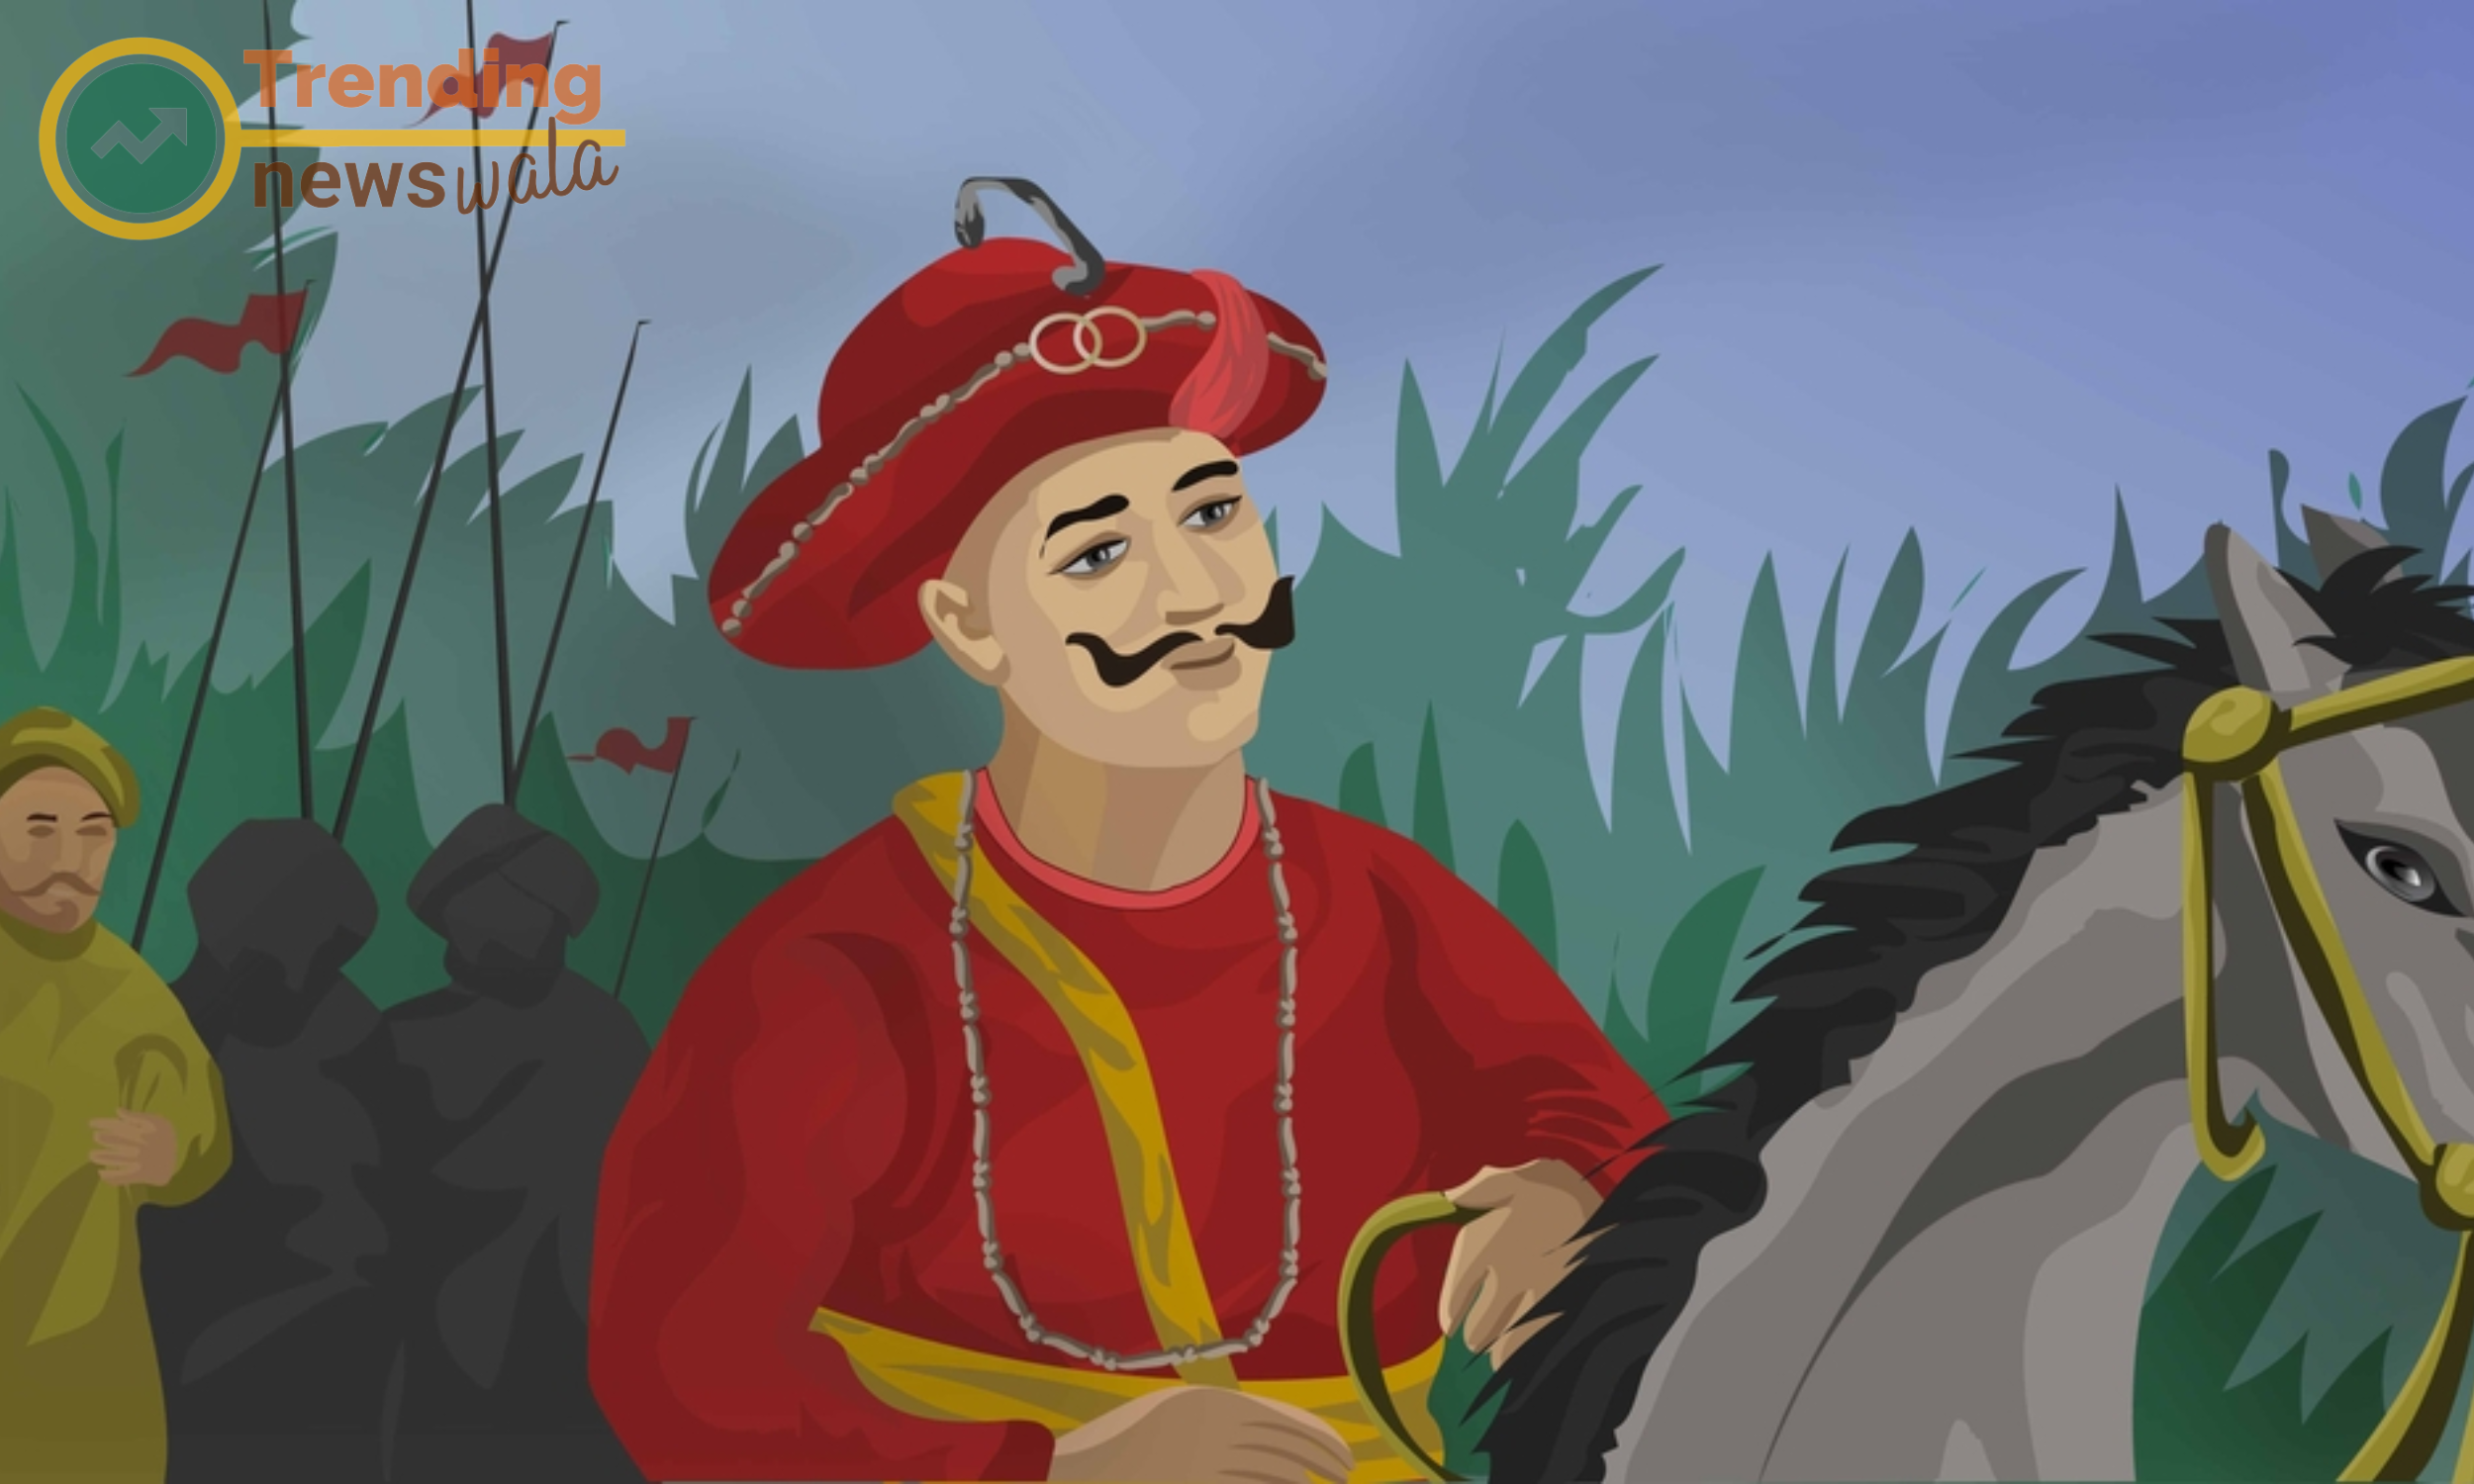  The overall policies and actions of Tipu Sultan